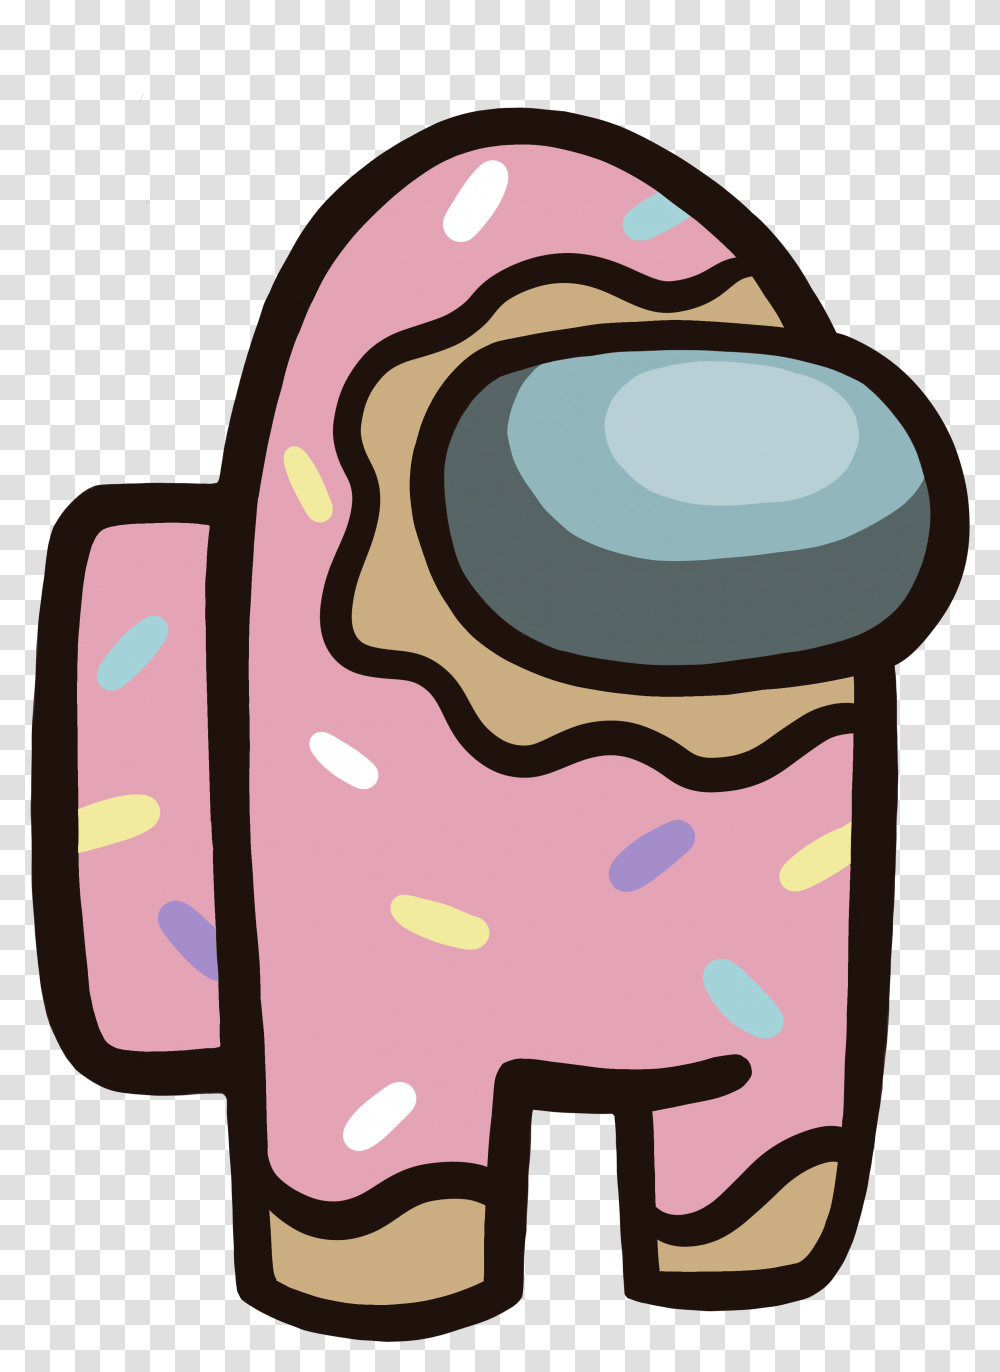 Cartoon Wallpaper Iphone Among Us Donut, Food, Sweets, Confectionery, Dessert Transparent Png